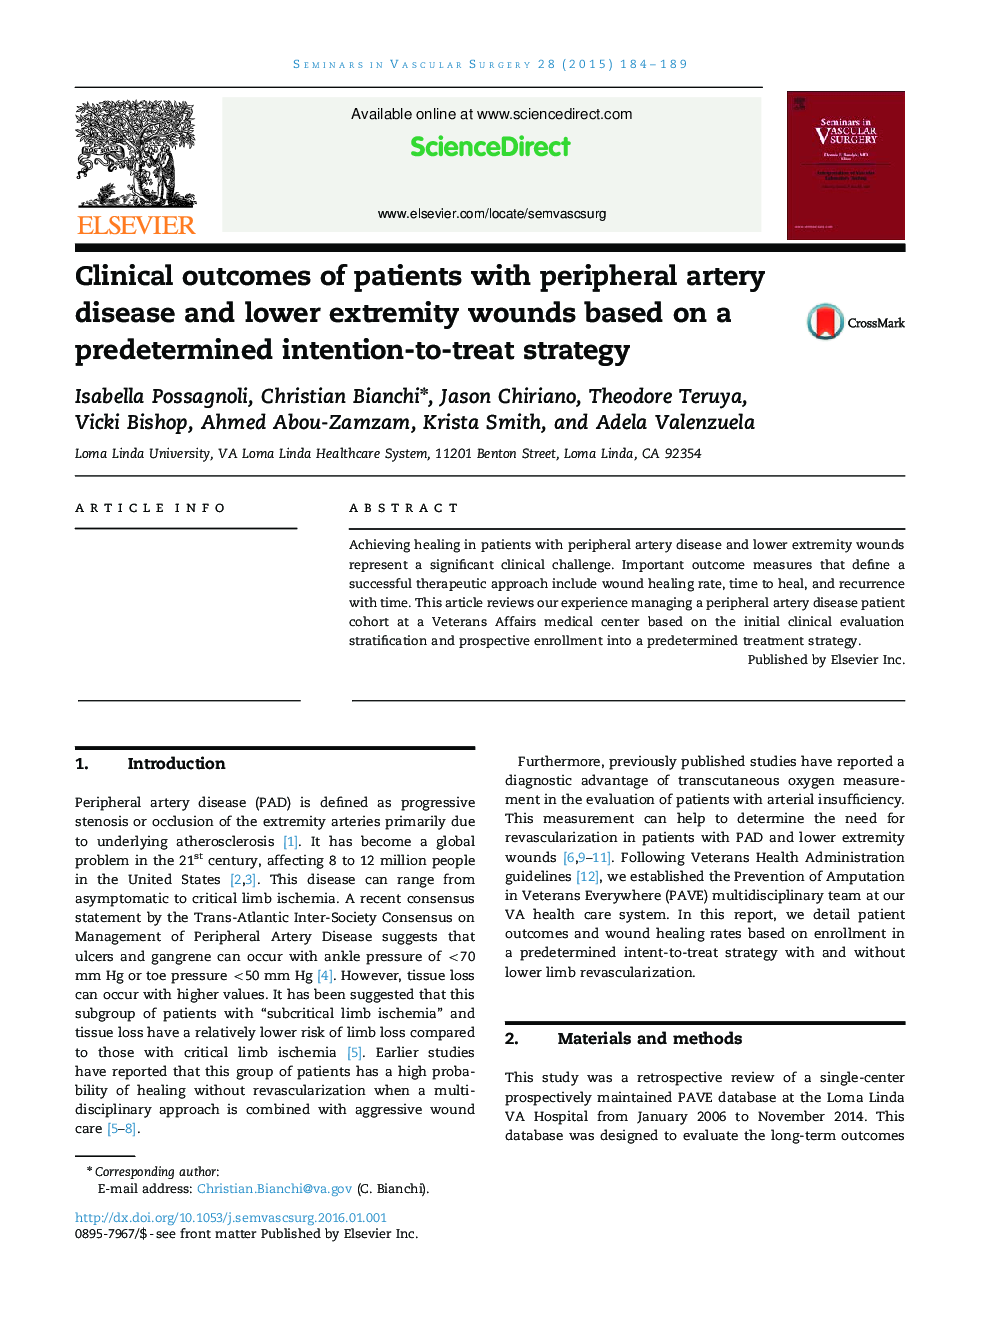 Clinical outcomes of patients with peripheral artery disease and lower extremity wounds based on a predetermined intention-to-treat strategy